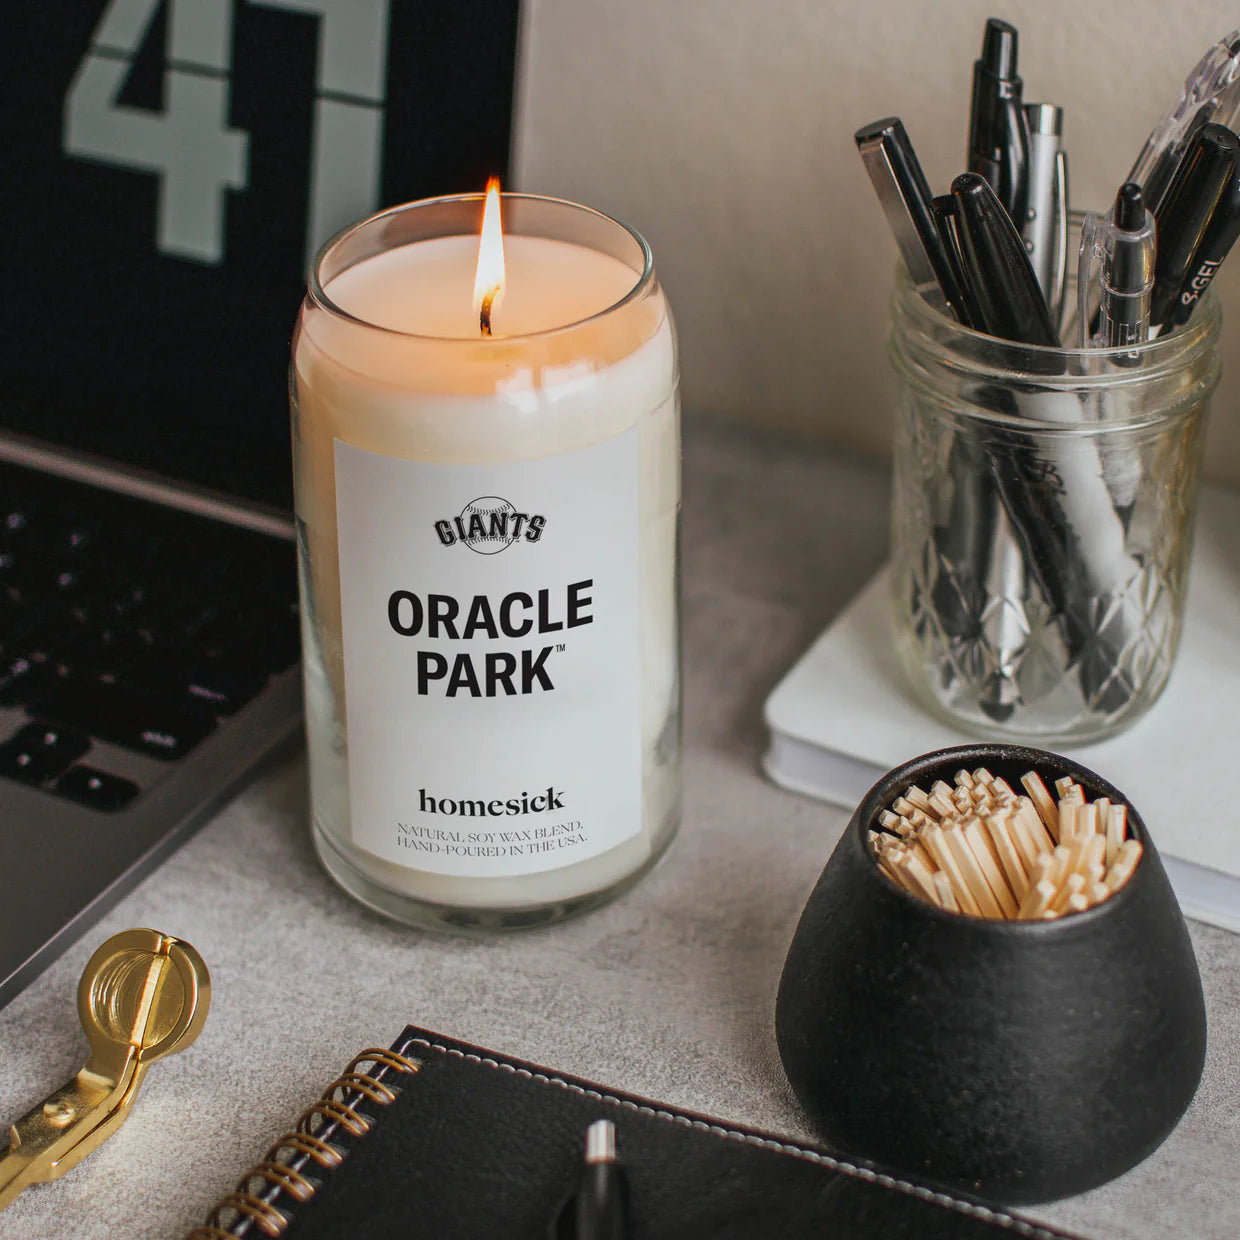 Oracle Park Candle on desk next to computer, matches, pens and notebook